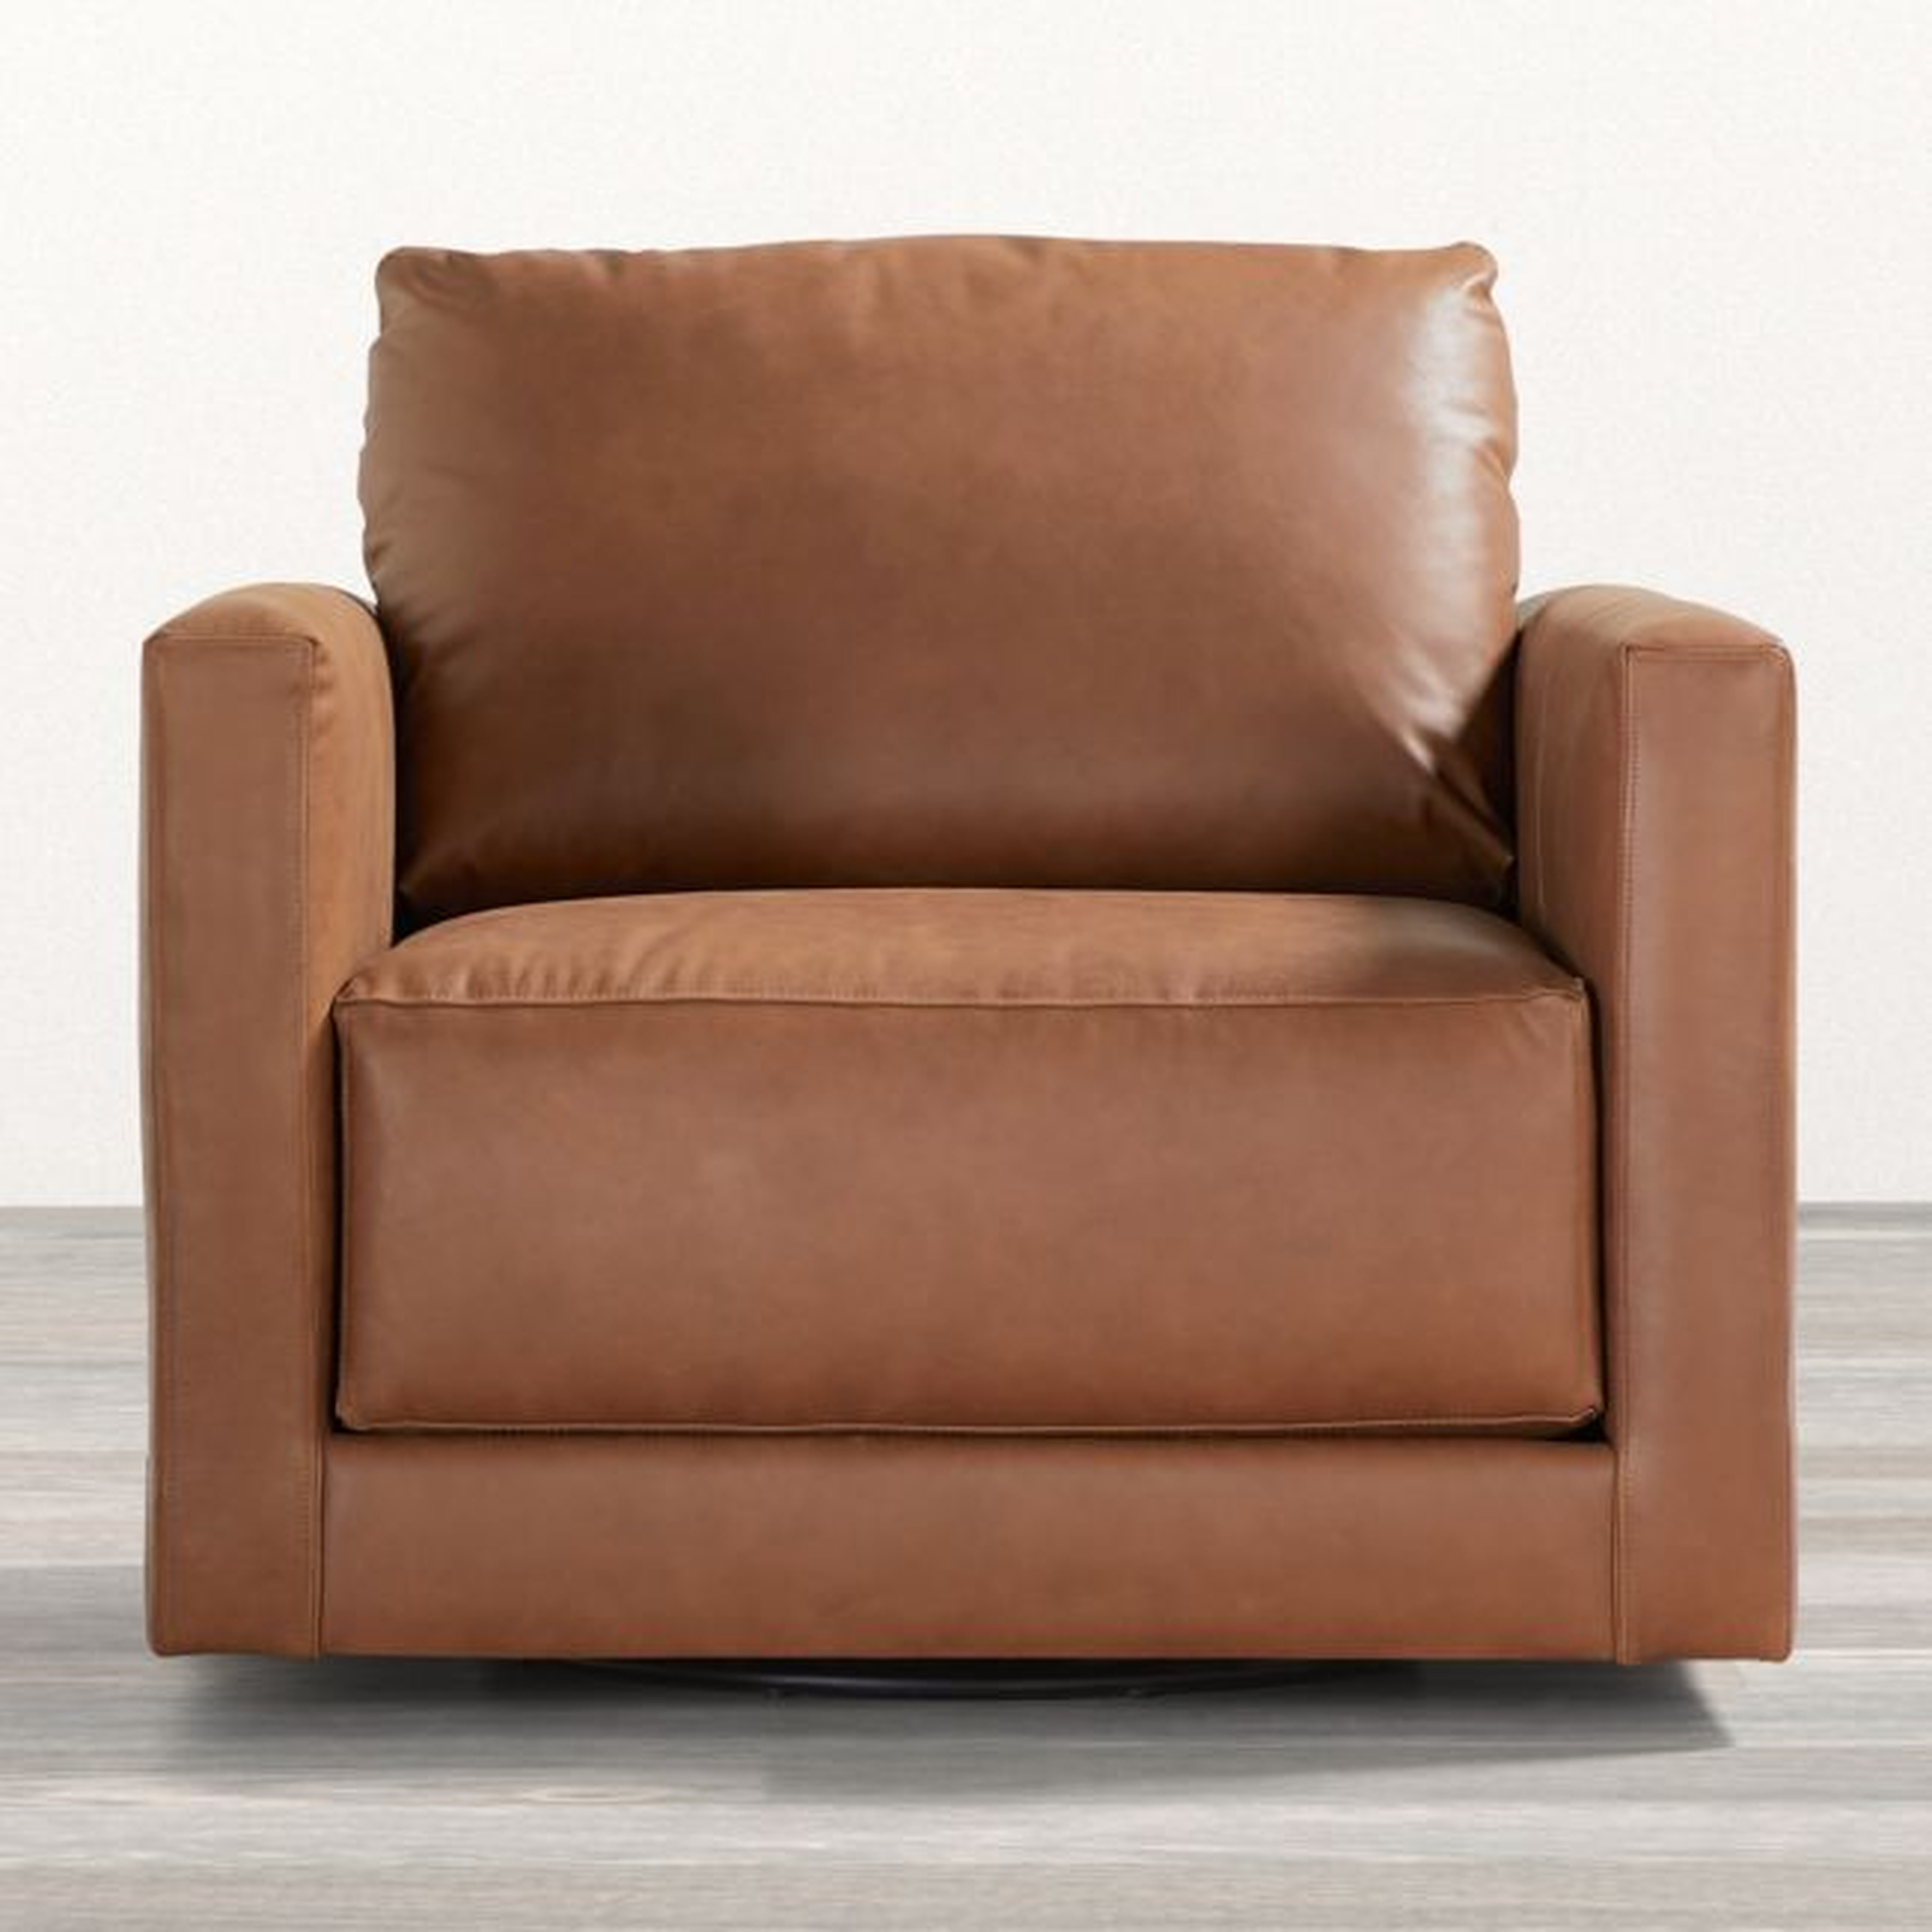 Gather Leather Swivel Chair - Crate and Barrel